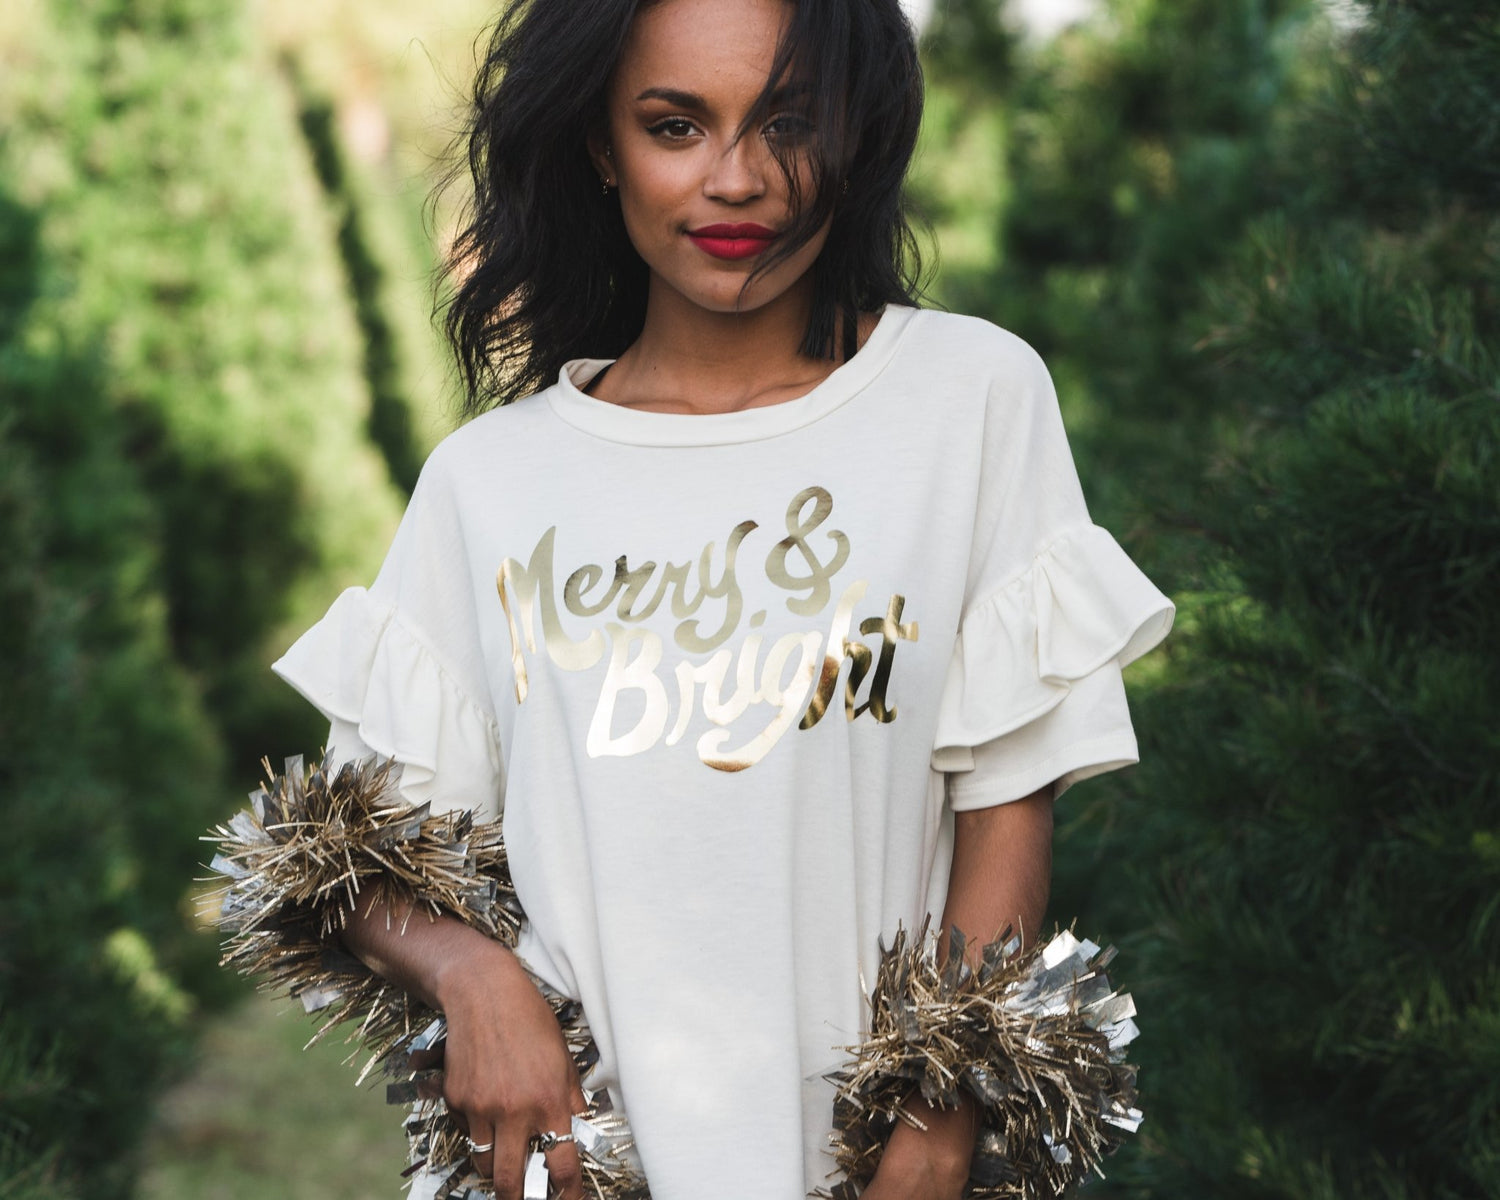 Holiday inspired t-shirts, hoodies, and trendy apparel